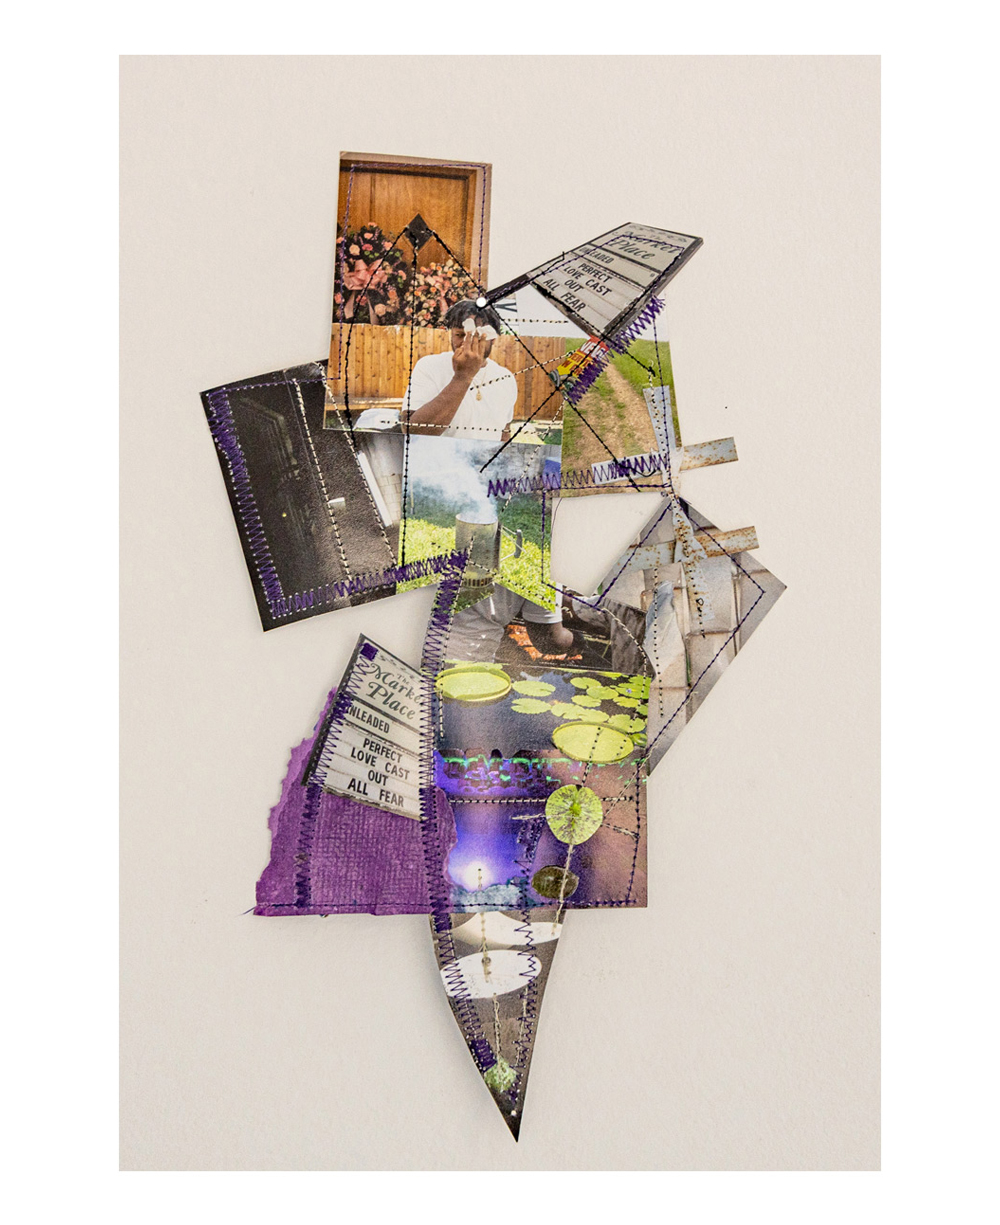 A collage featuring different photographs arranged in an uneven diamond shape and stitched together with purple zigzag stitch.